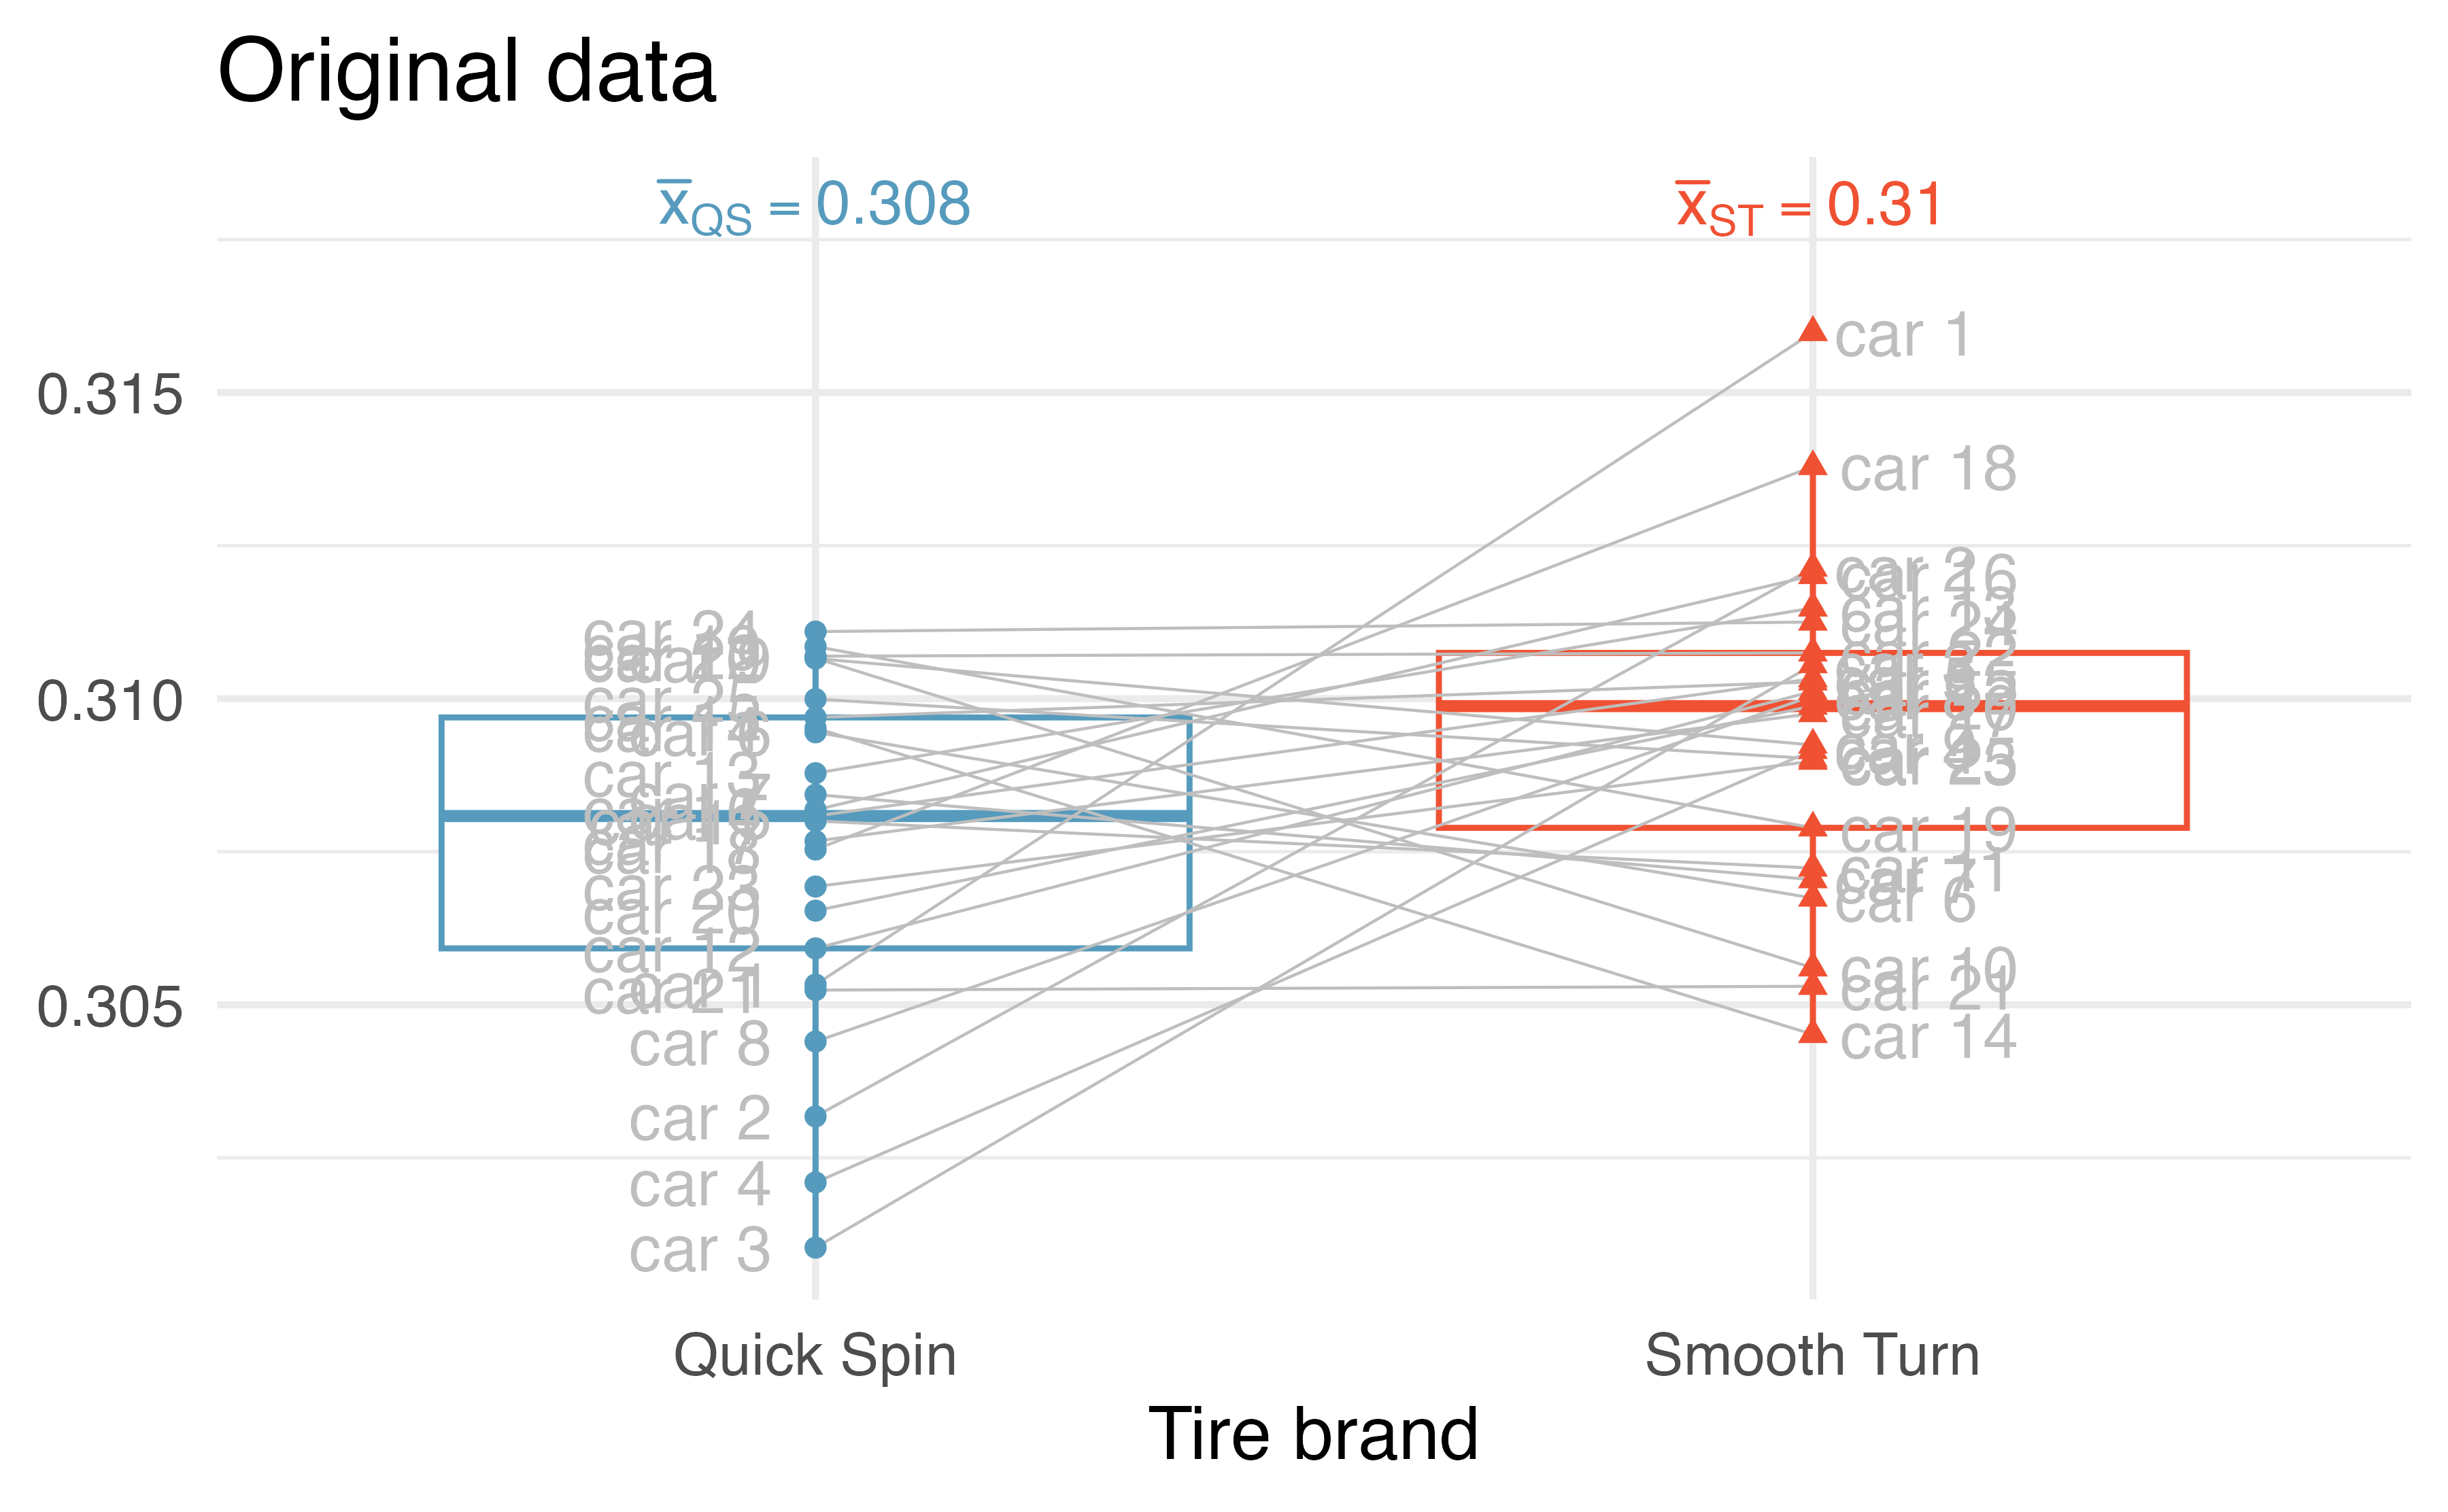 Boxplots of the tire tread data (in cm) and the brand of tire from which the original measurements came.